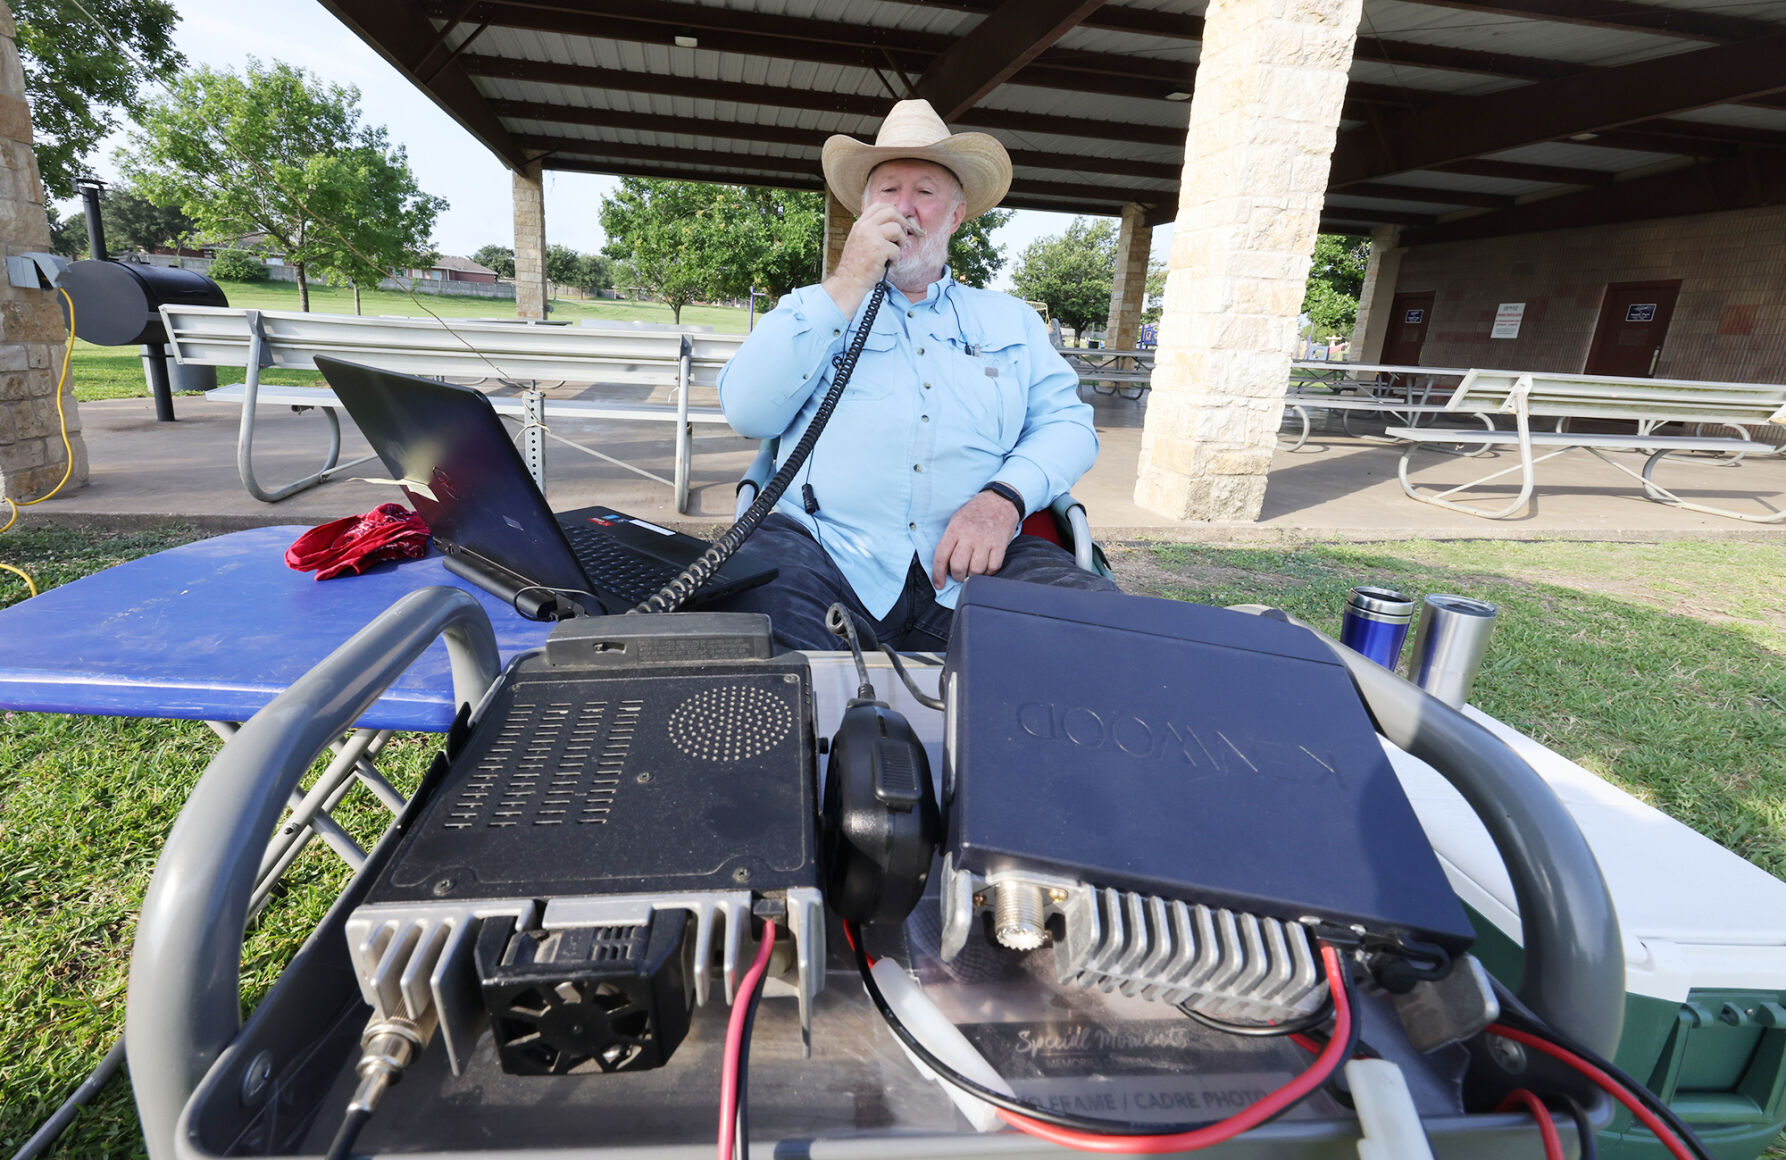 Field Day brings ham radio operators to Hewitt Park for nationwide event